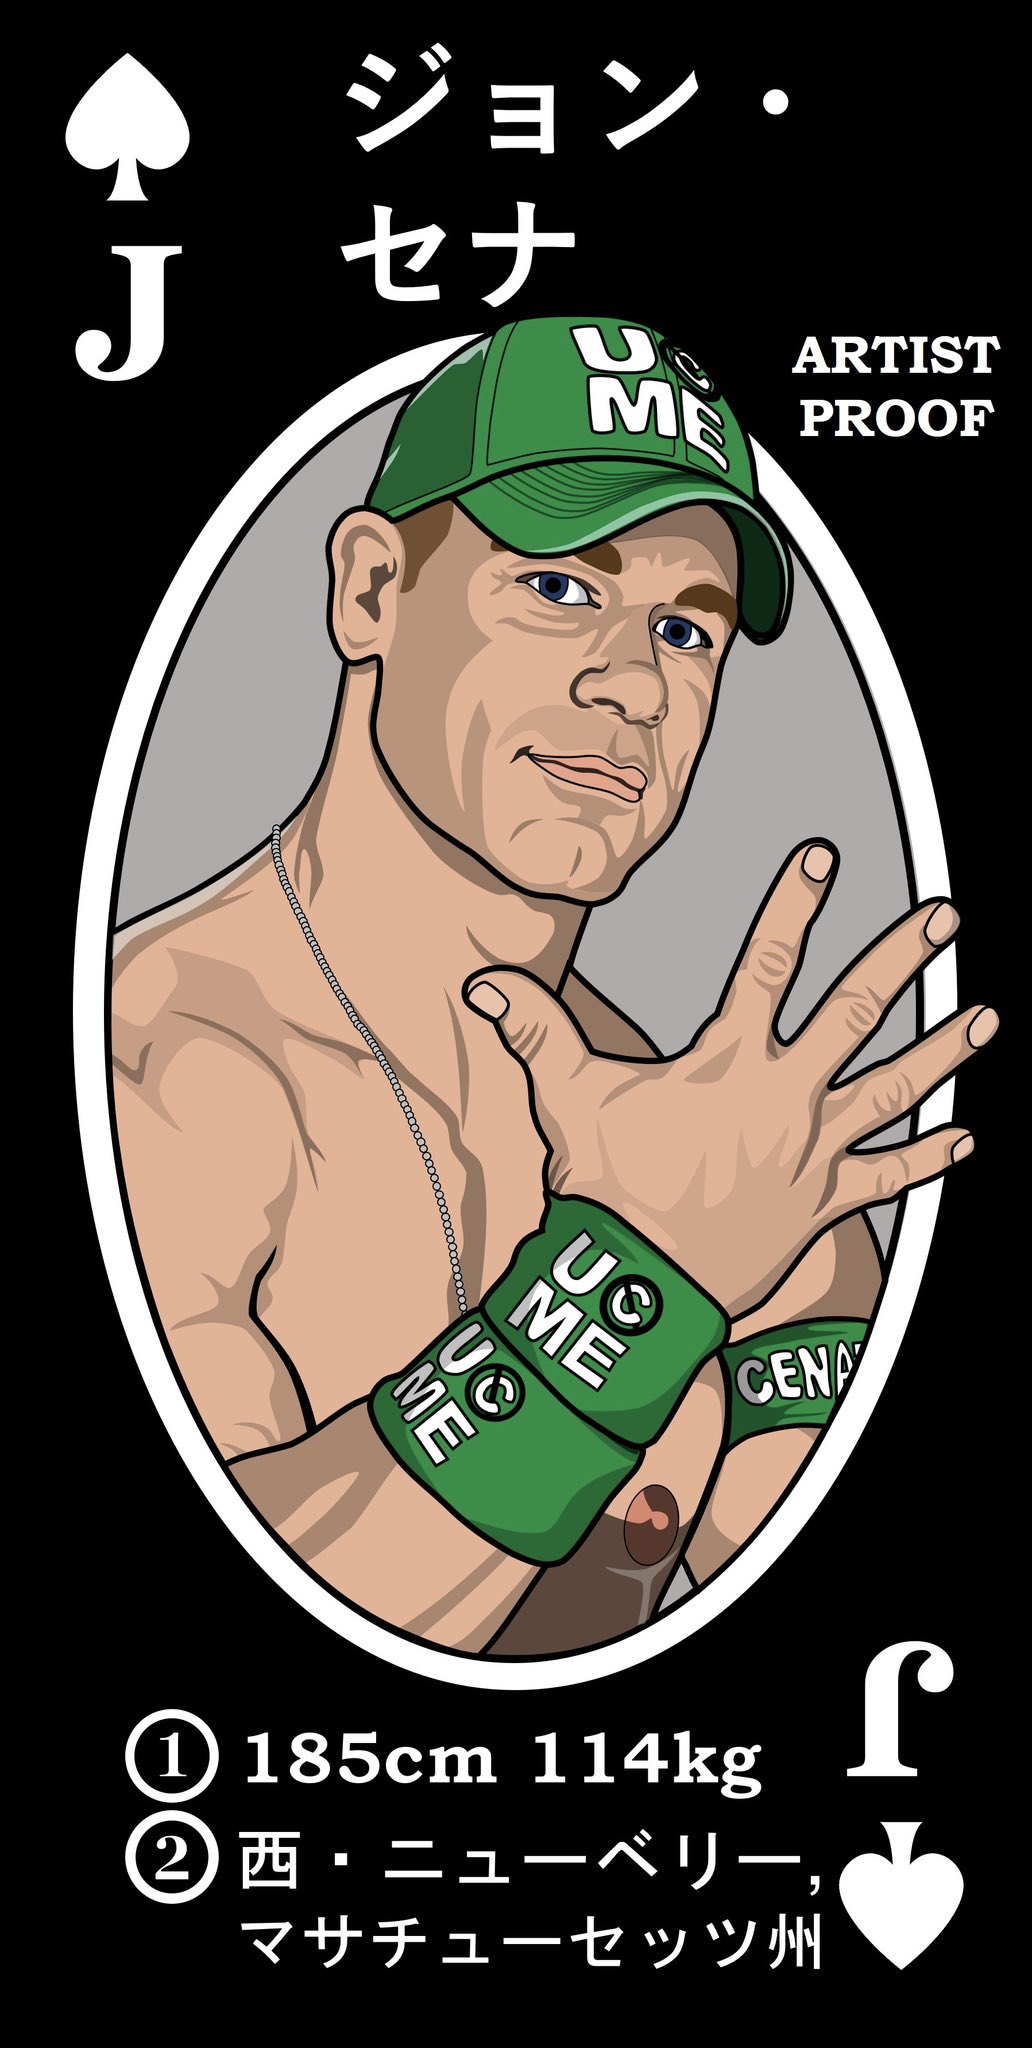 Happy 46th birthday to John Cena! 

Never before released Variant. 